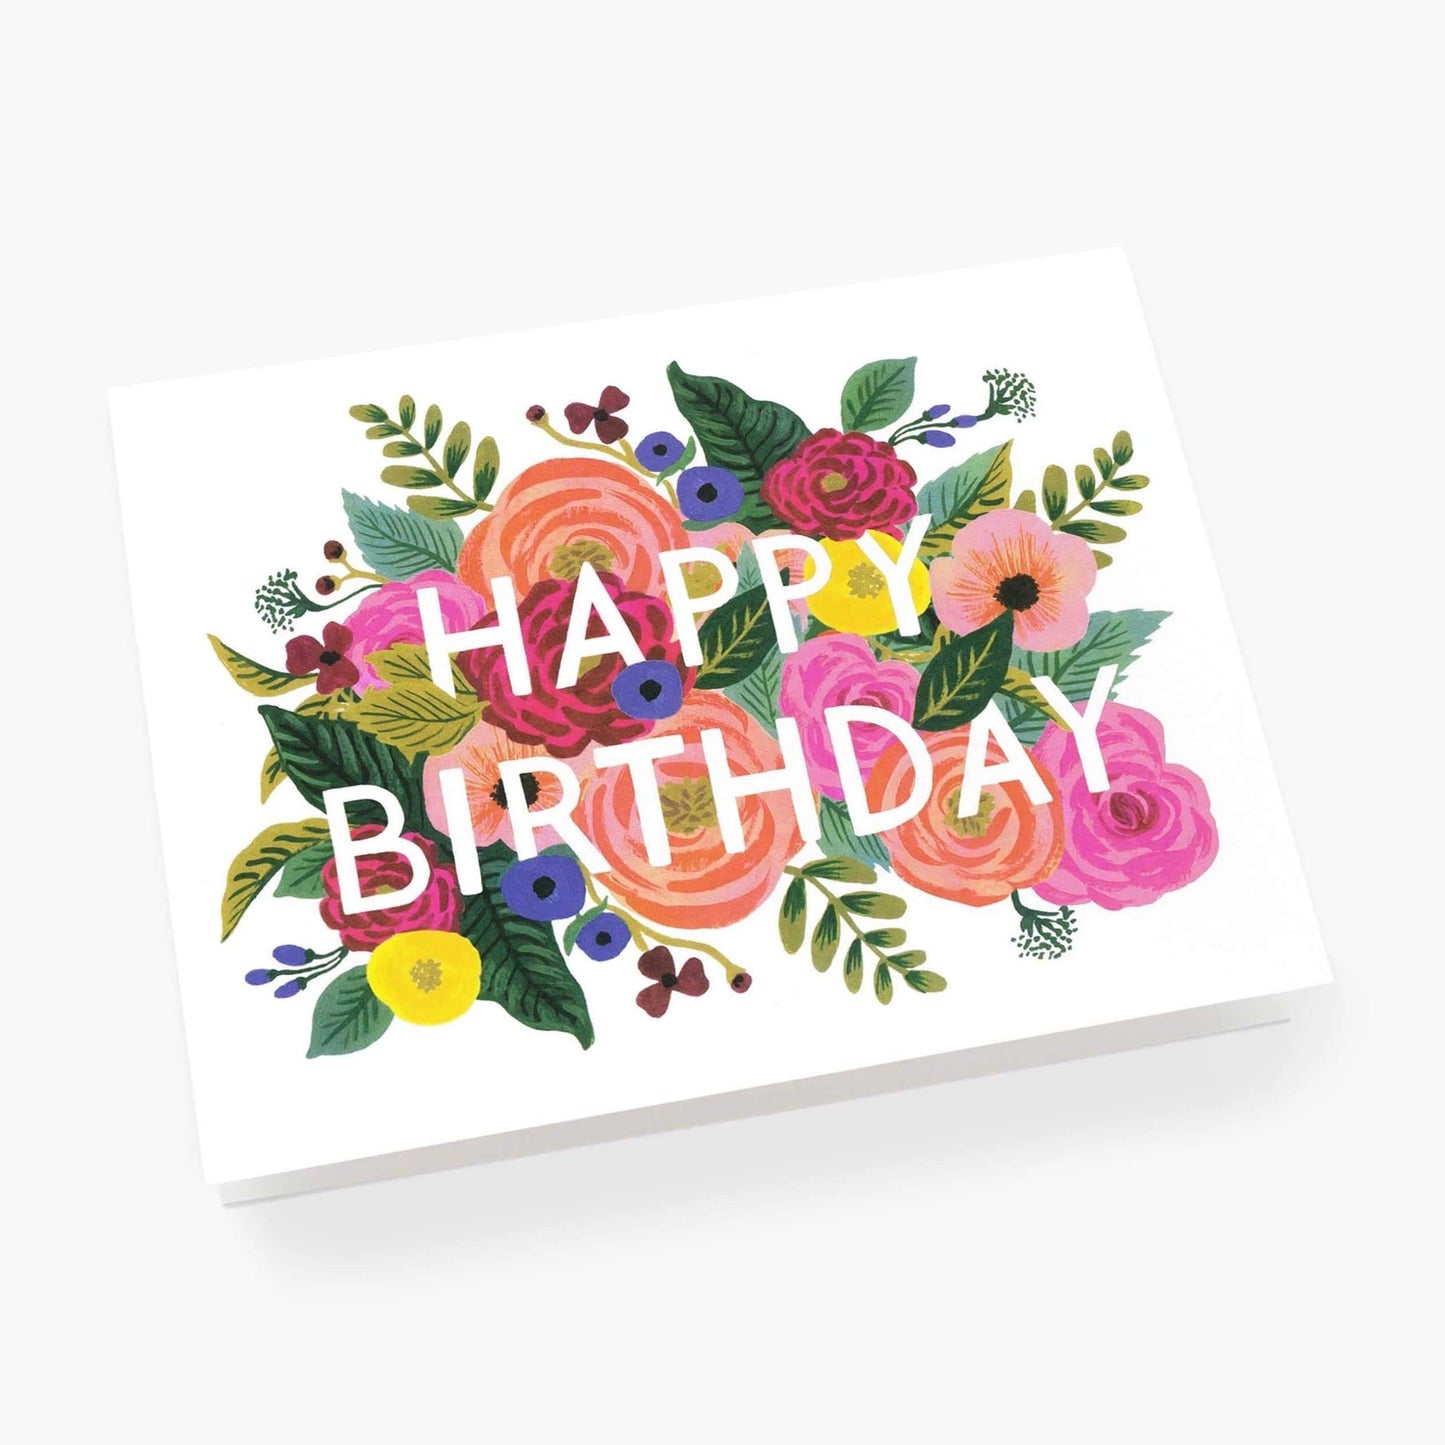 Rifle Paper Co Card - Julie Rose Floral | Birthday Cards Online UK Rifle Paper